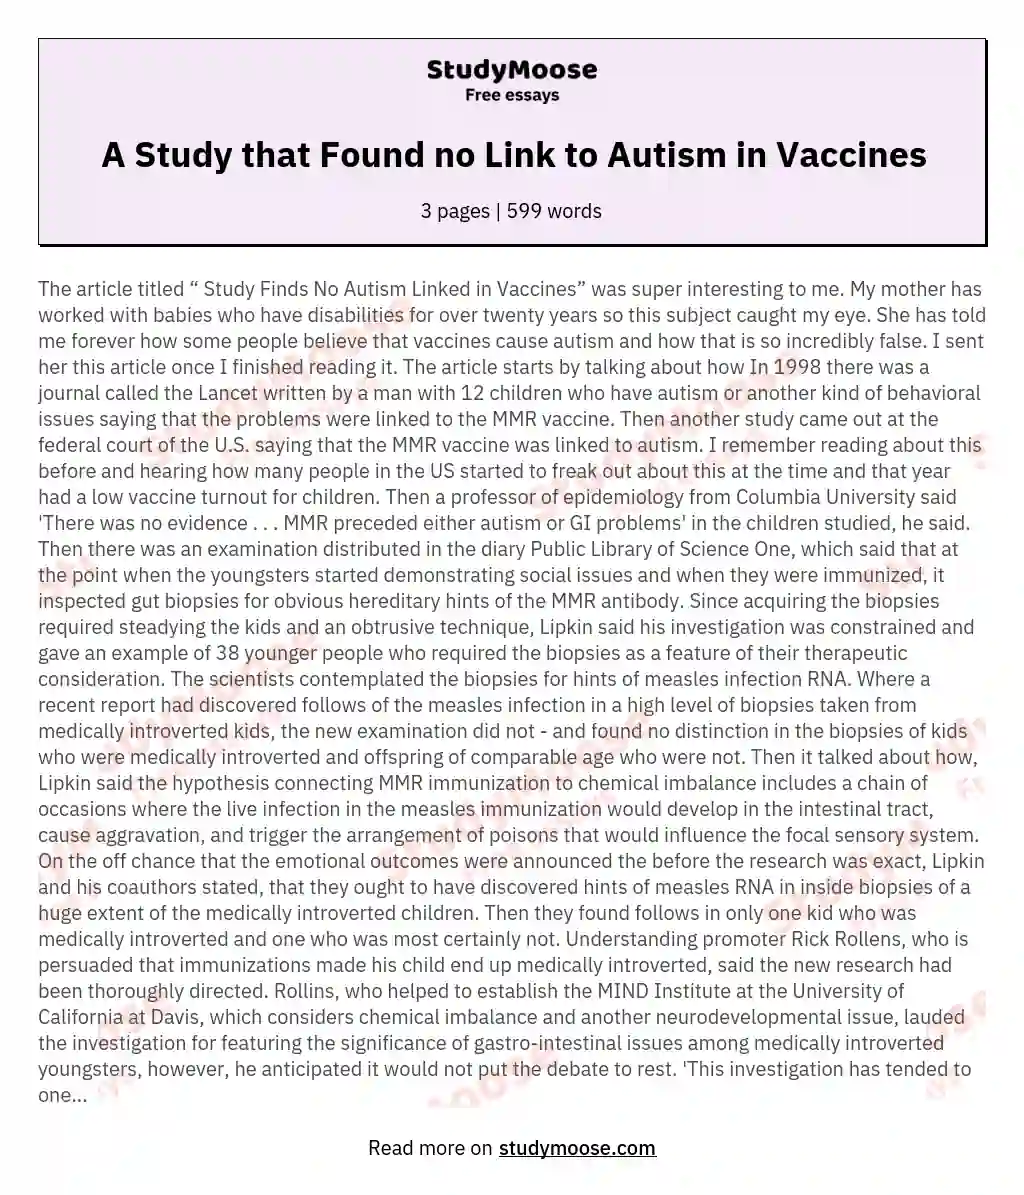 A Study that Found no Link to Autism in Vaccines essay